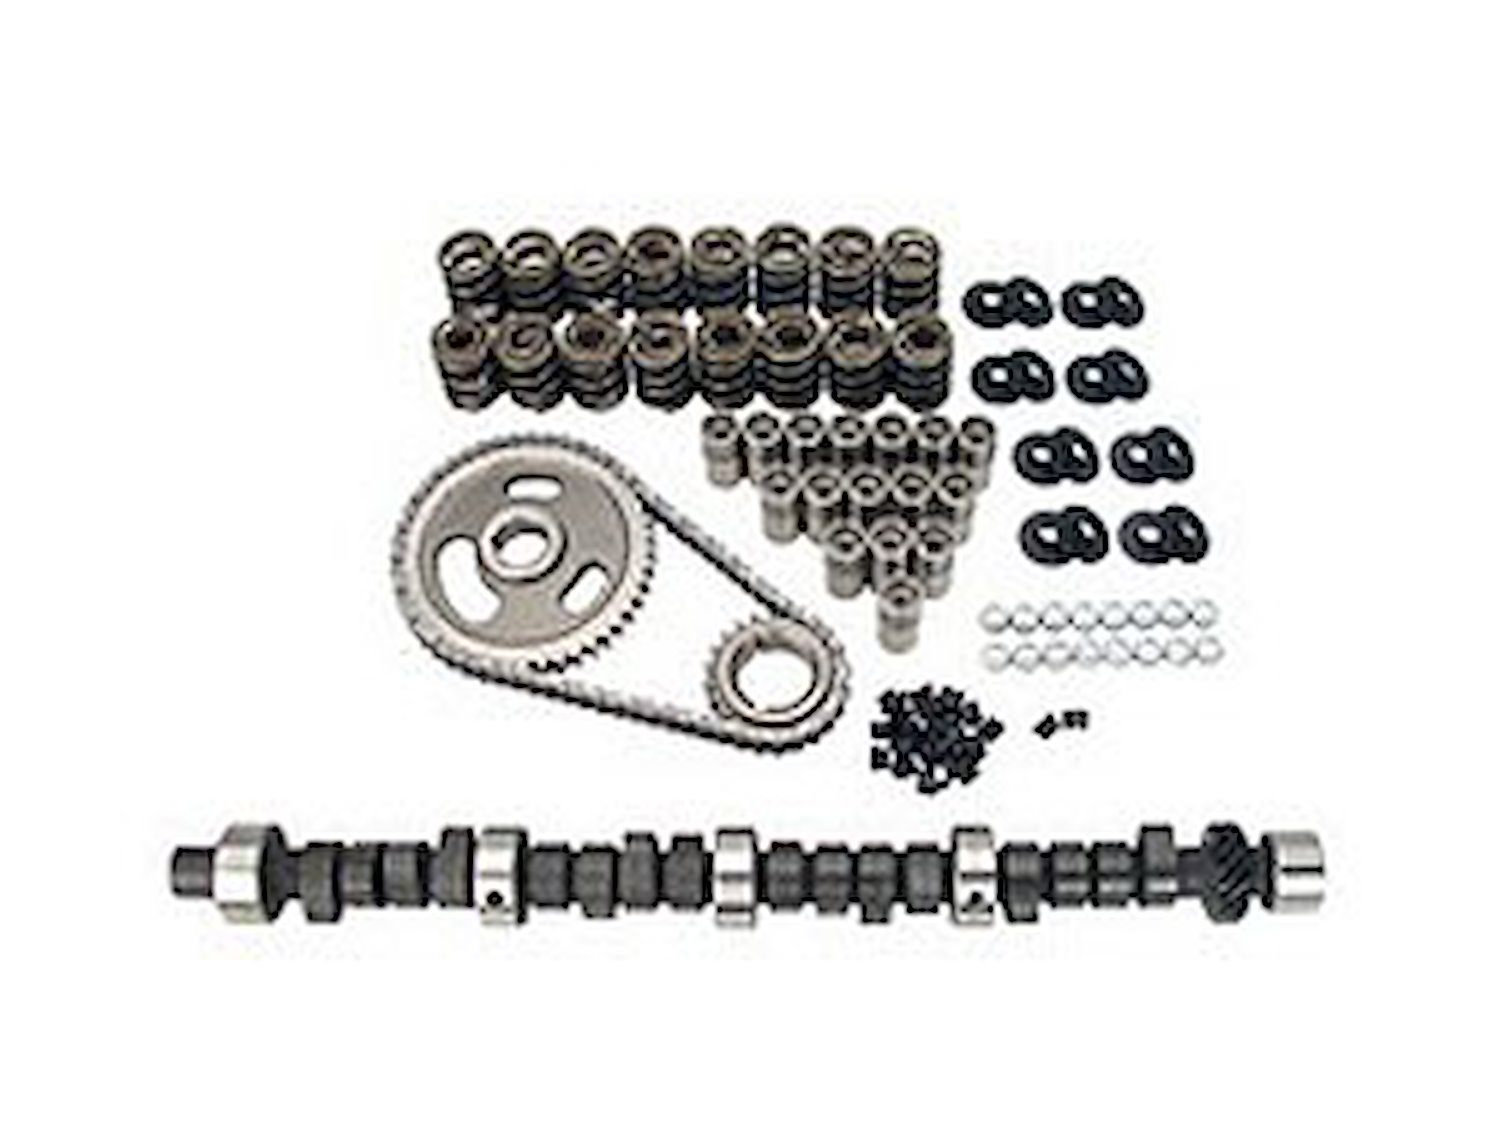 Xtreme Energy 256H Hydraulic Flat Tappet Camshaft Complete Kit Lift .447"/.455" Duration 256°/268° RPM Range 1000-5200